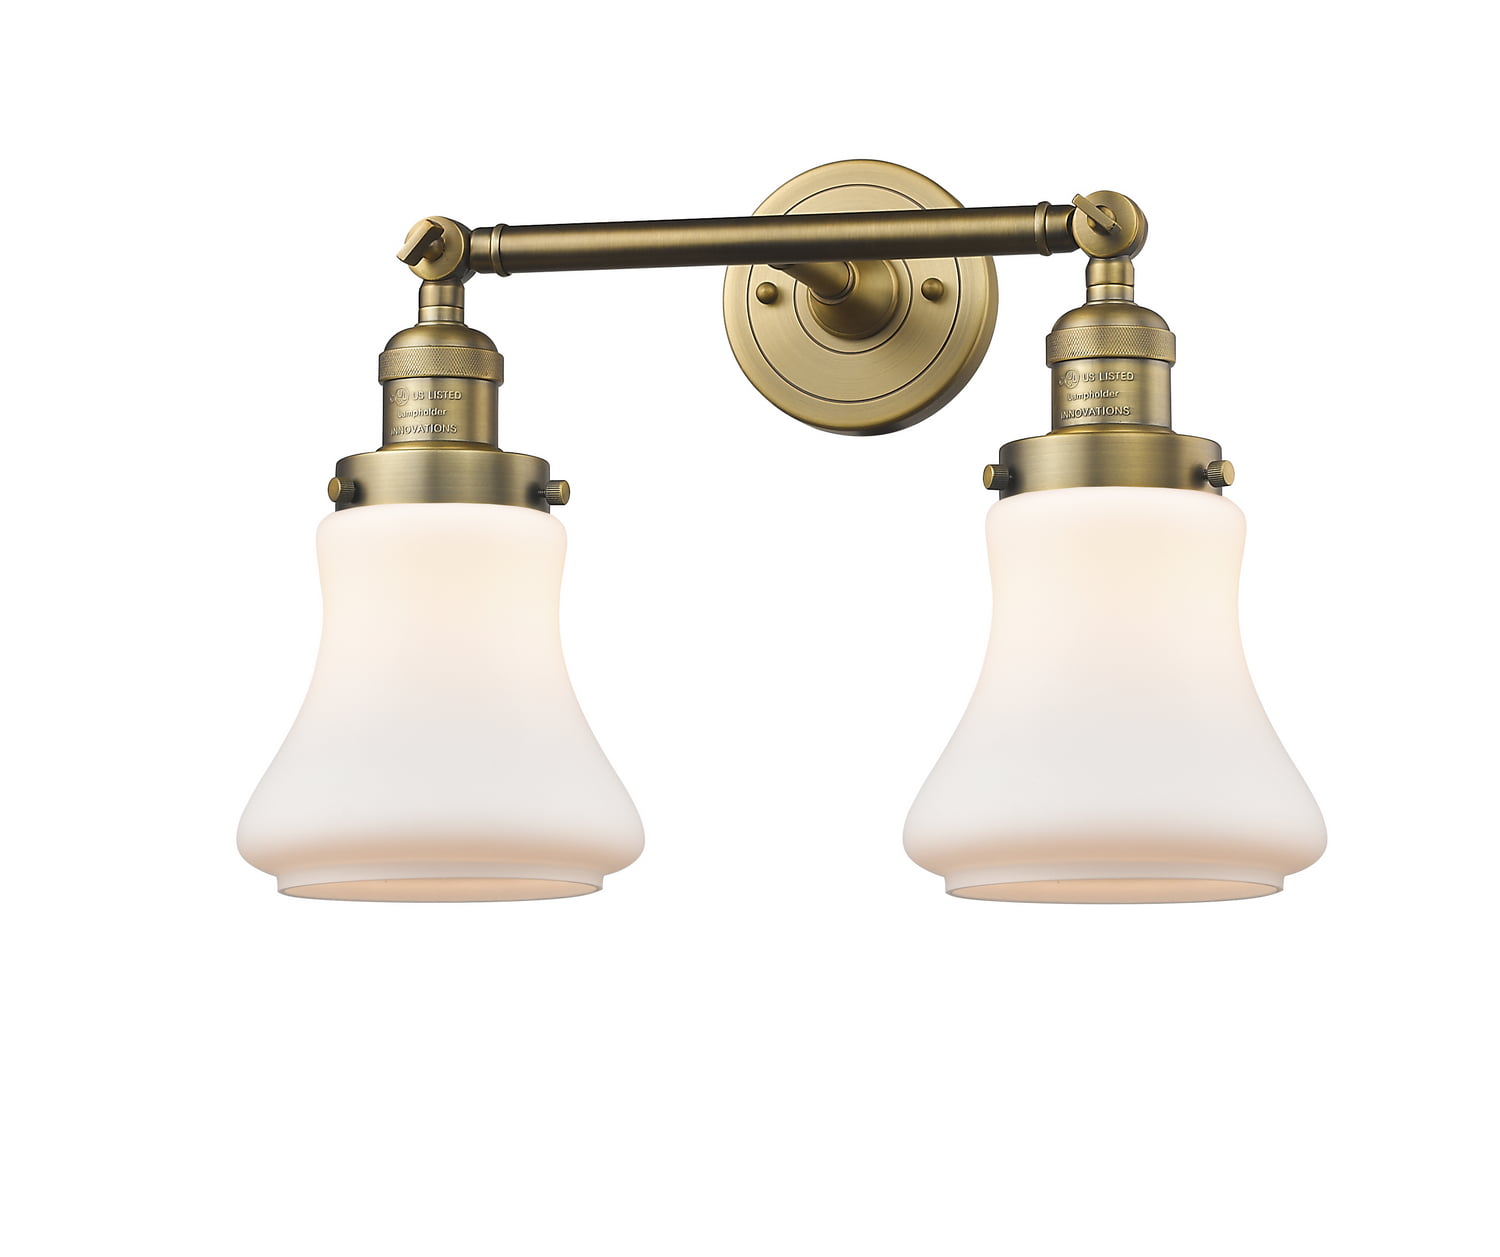 Innovations 208-AC-G191-LED 2 Light Vintage Dimmable LED Bathroom Fixture Antique Copper 